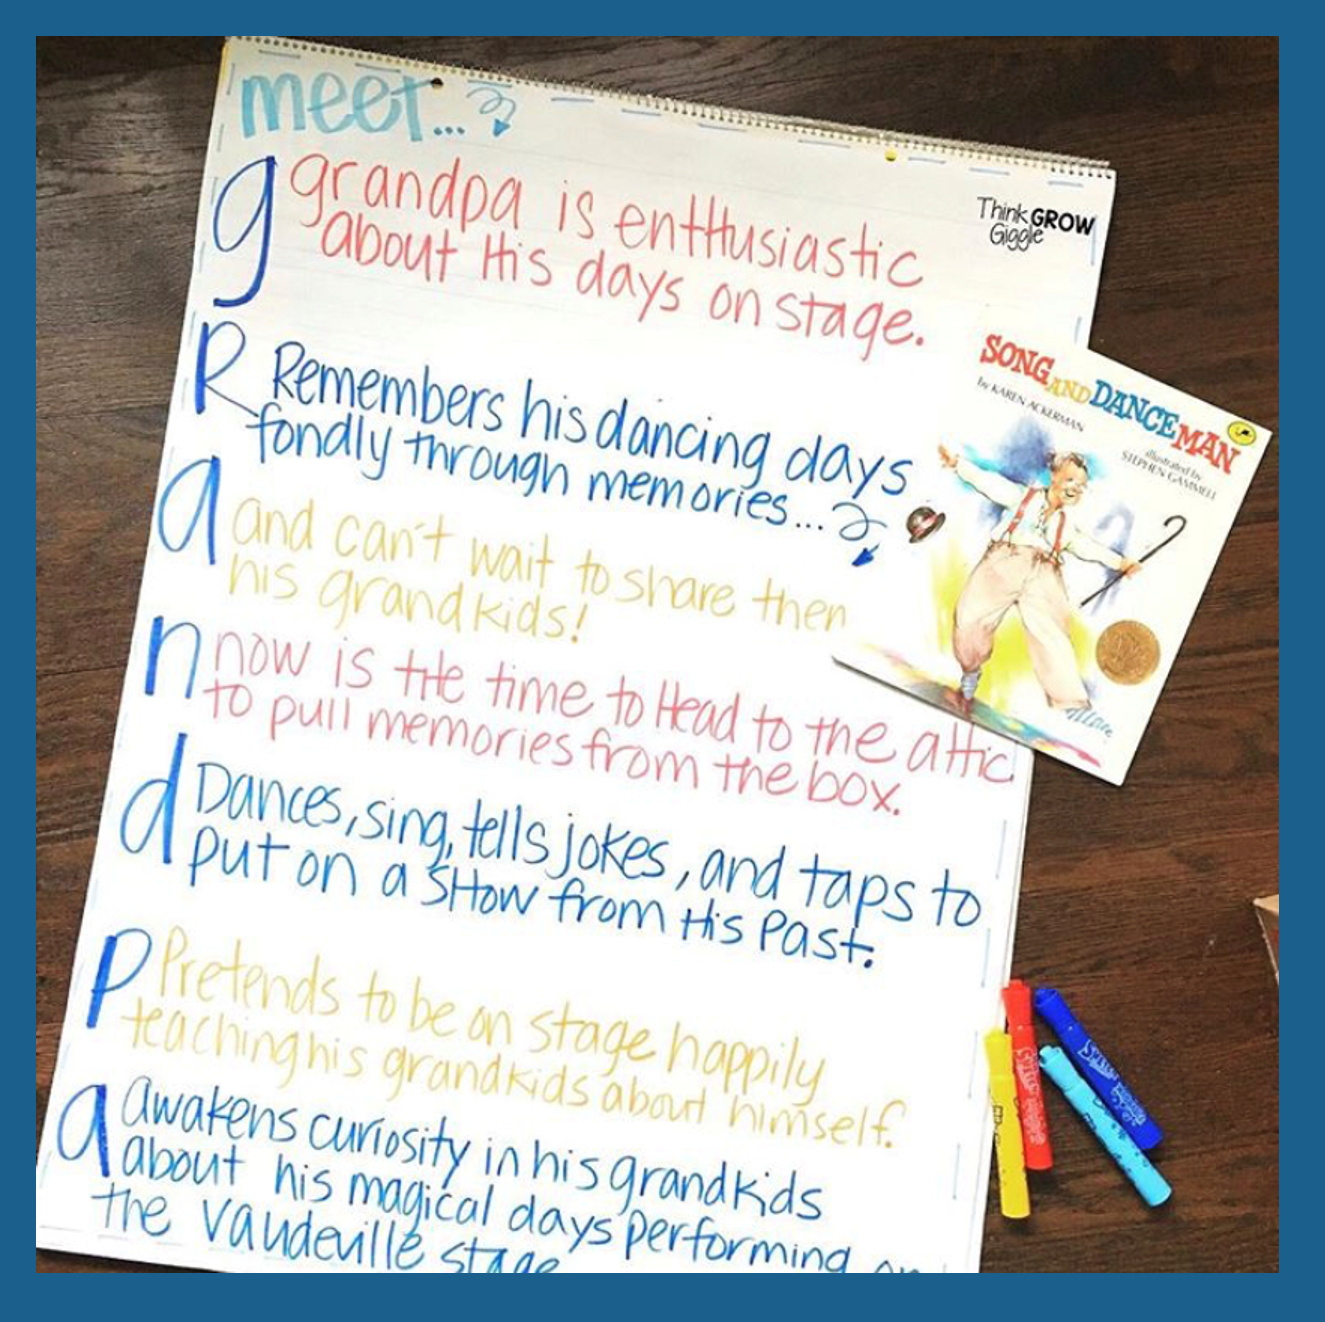 26 Acrostic Poem Ideas to Challenge Upper Elementary Students